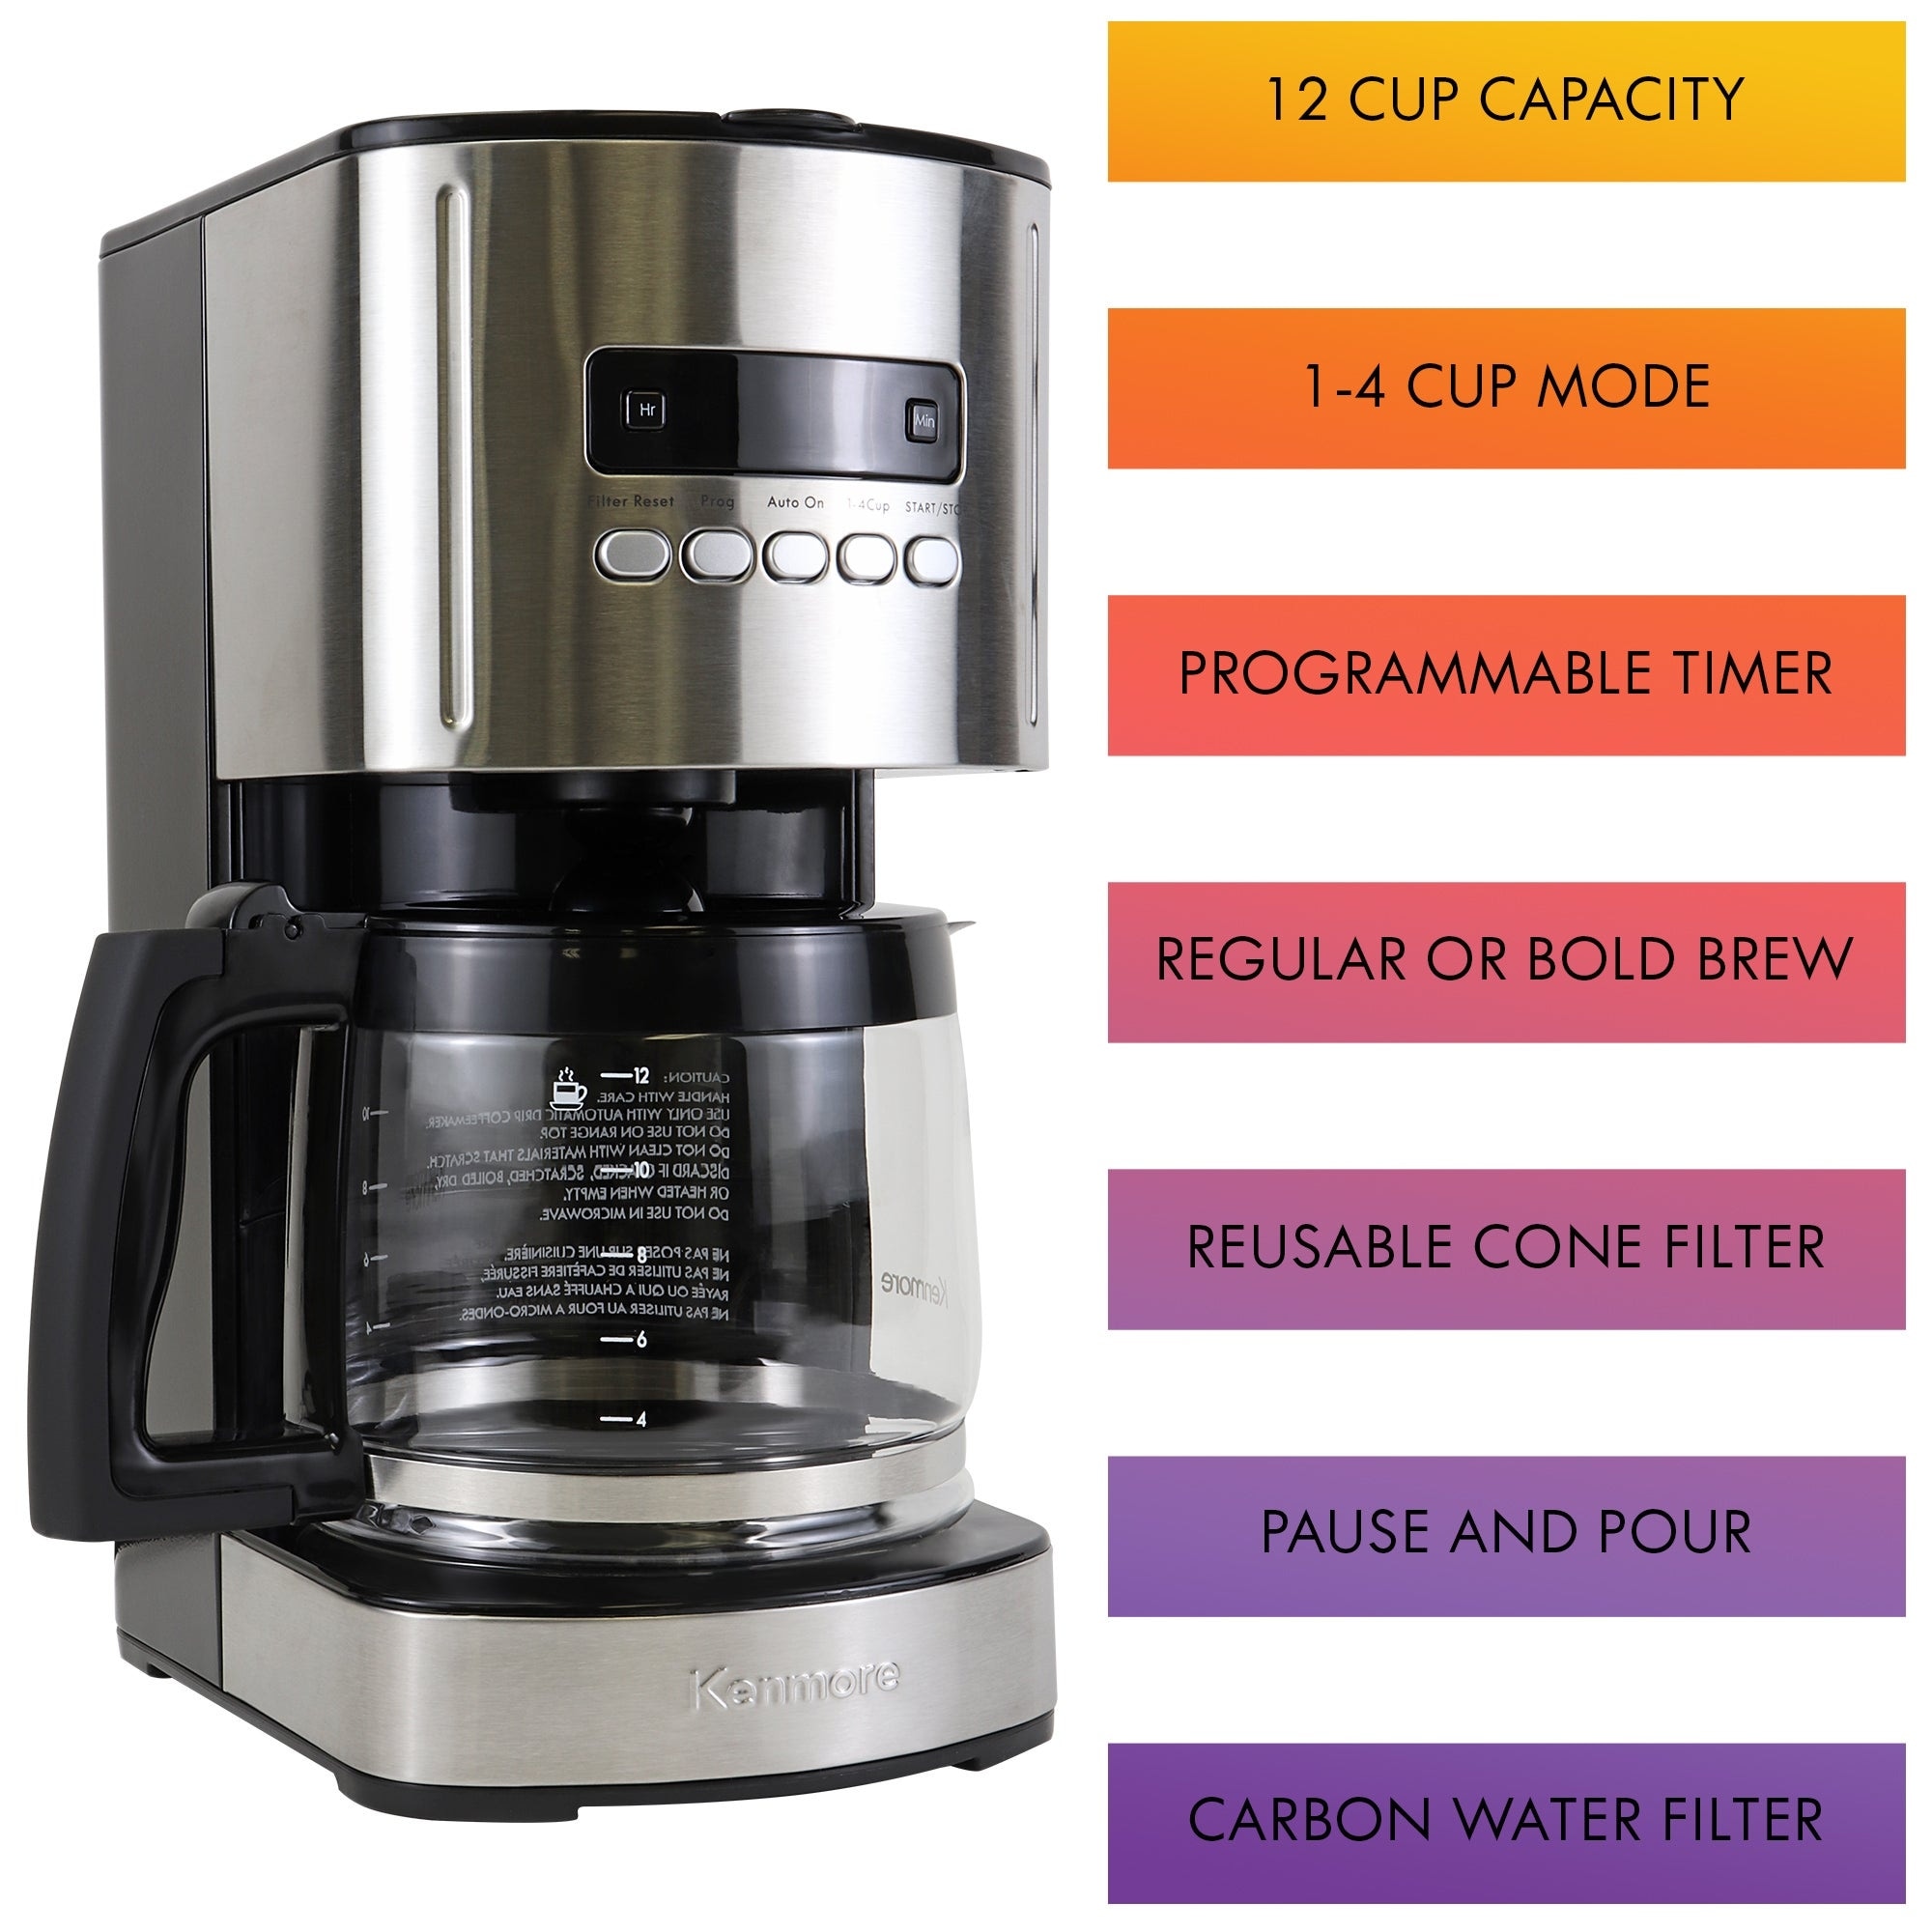 BLACK+DECKER 12-Cup Programmable Coffee Maker, Stainless,Silver